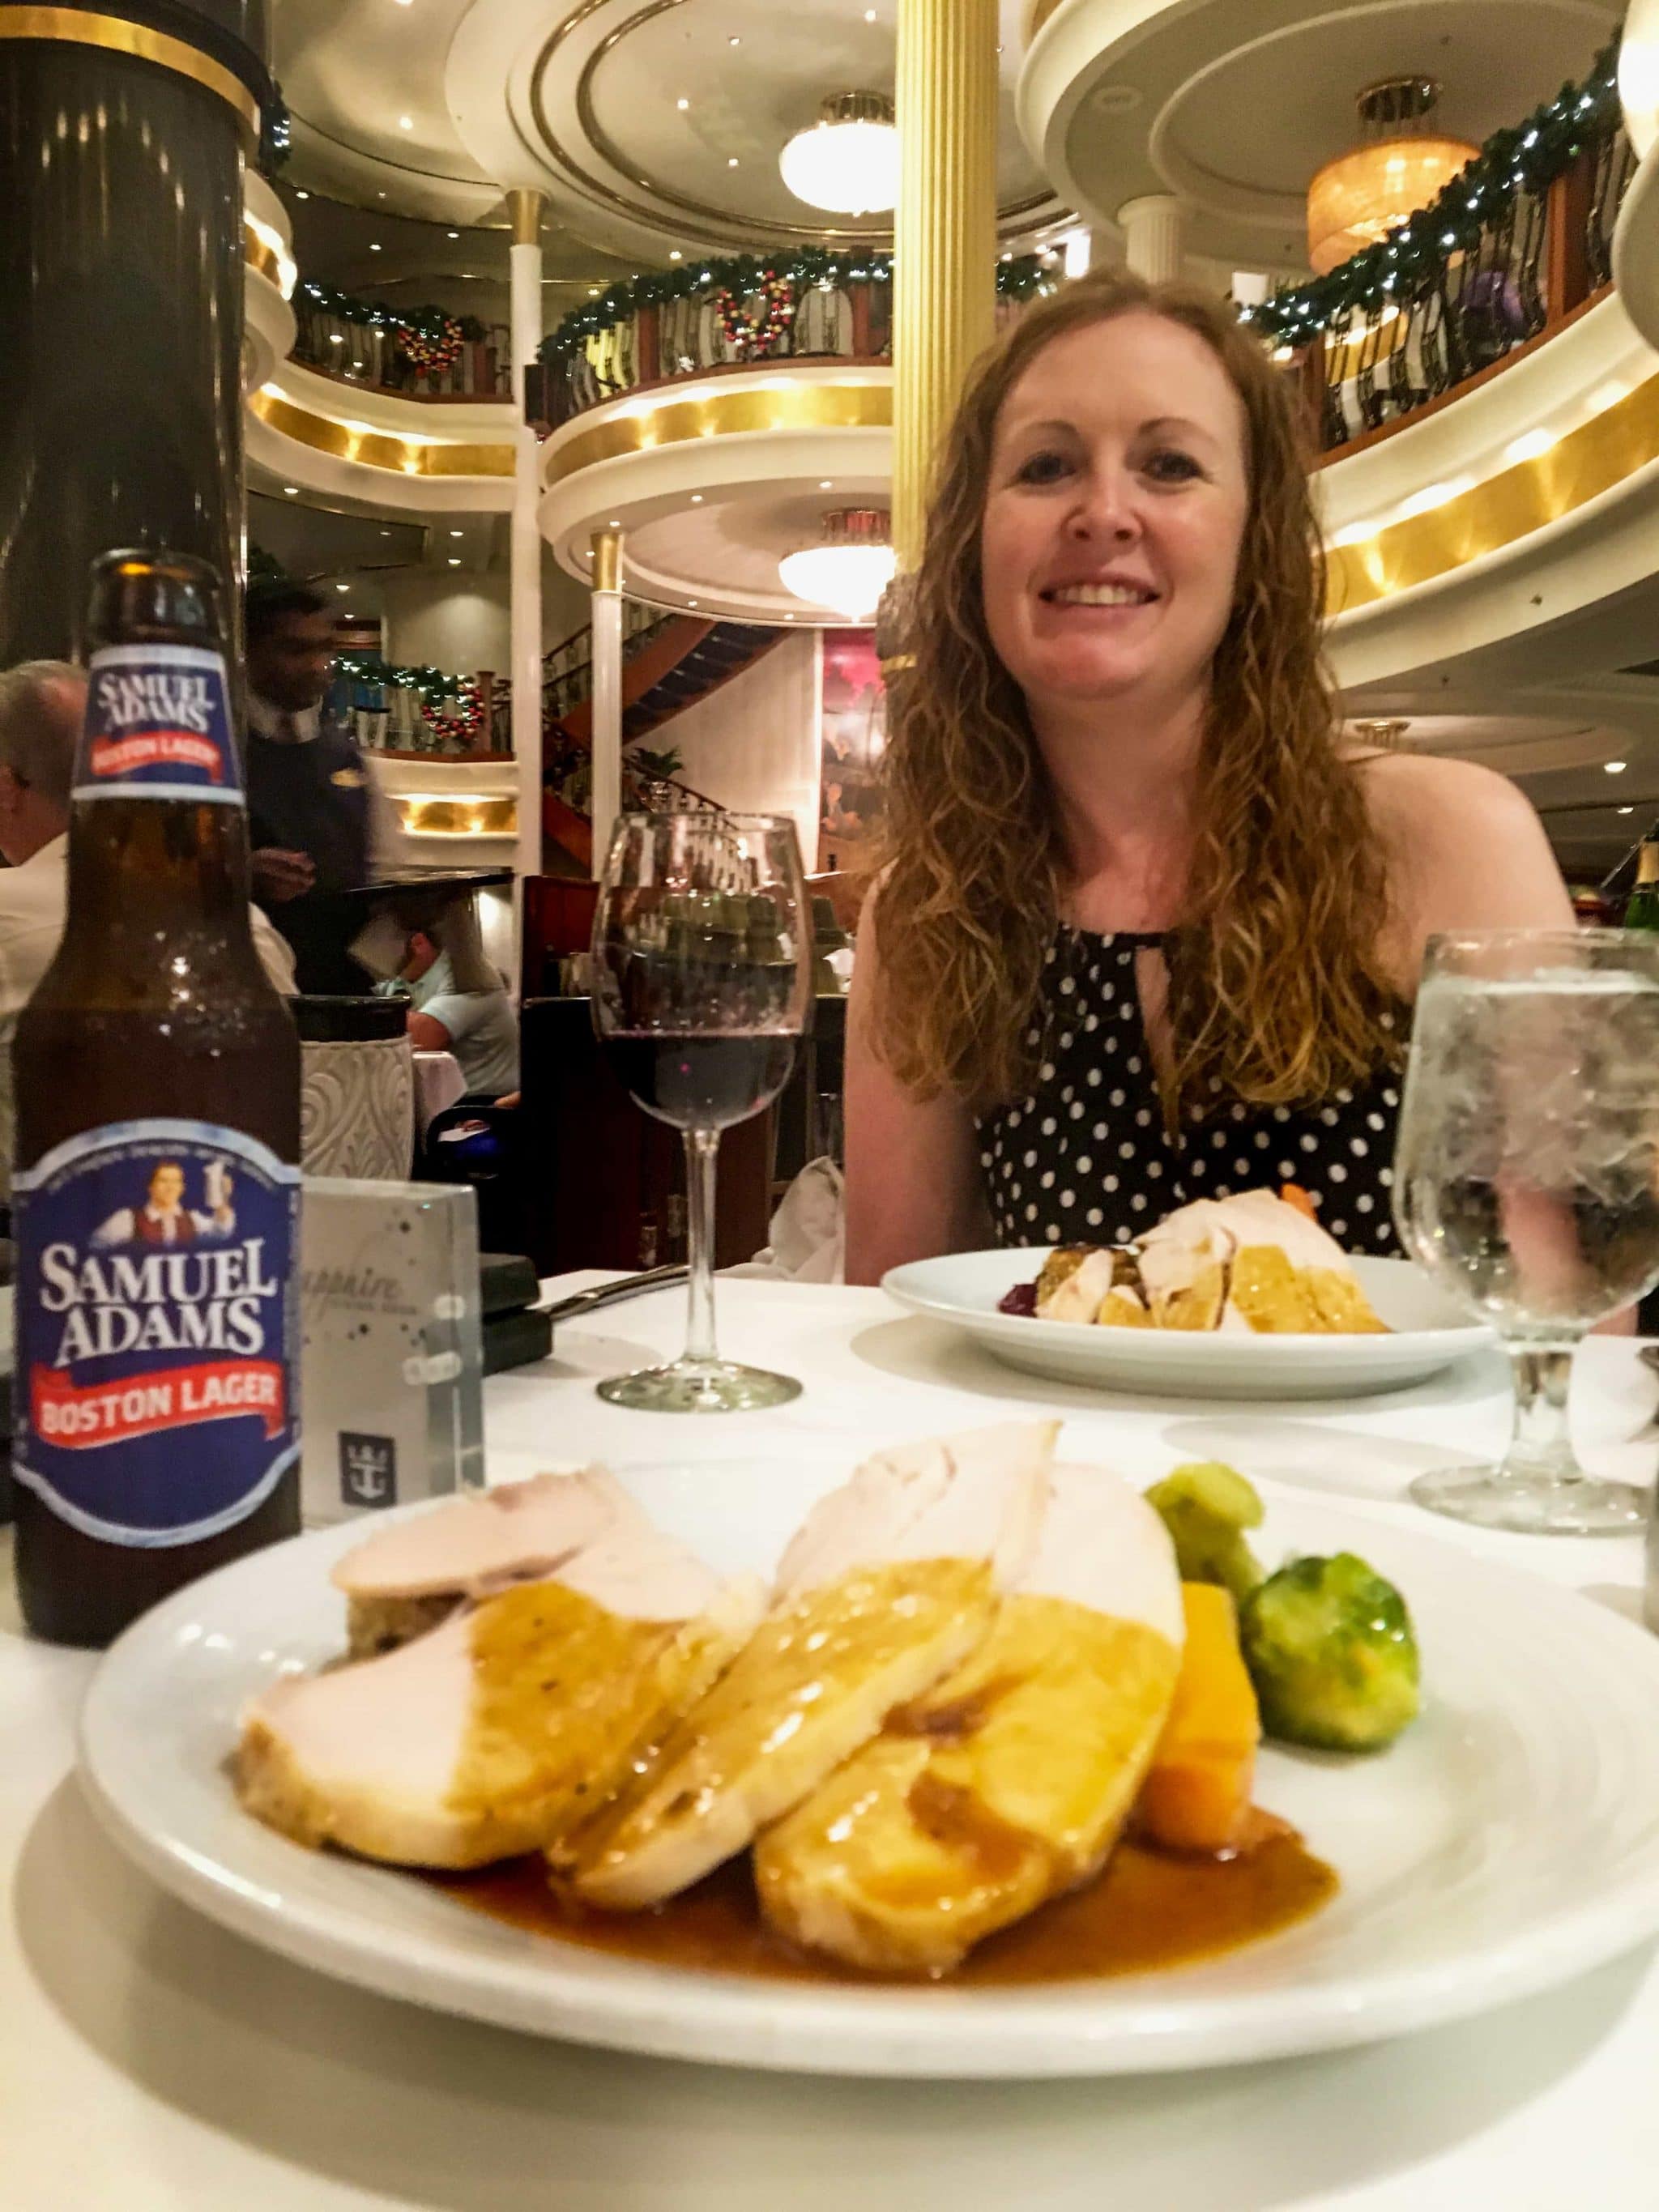 Thanksgiving dinner aboard the Adventure of the Seas